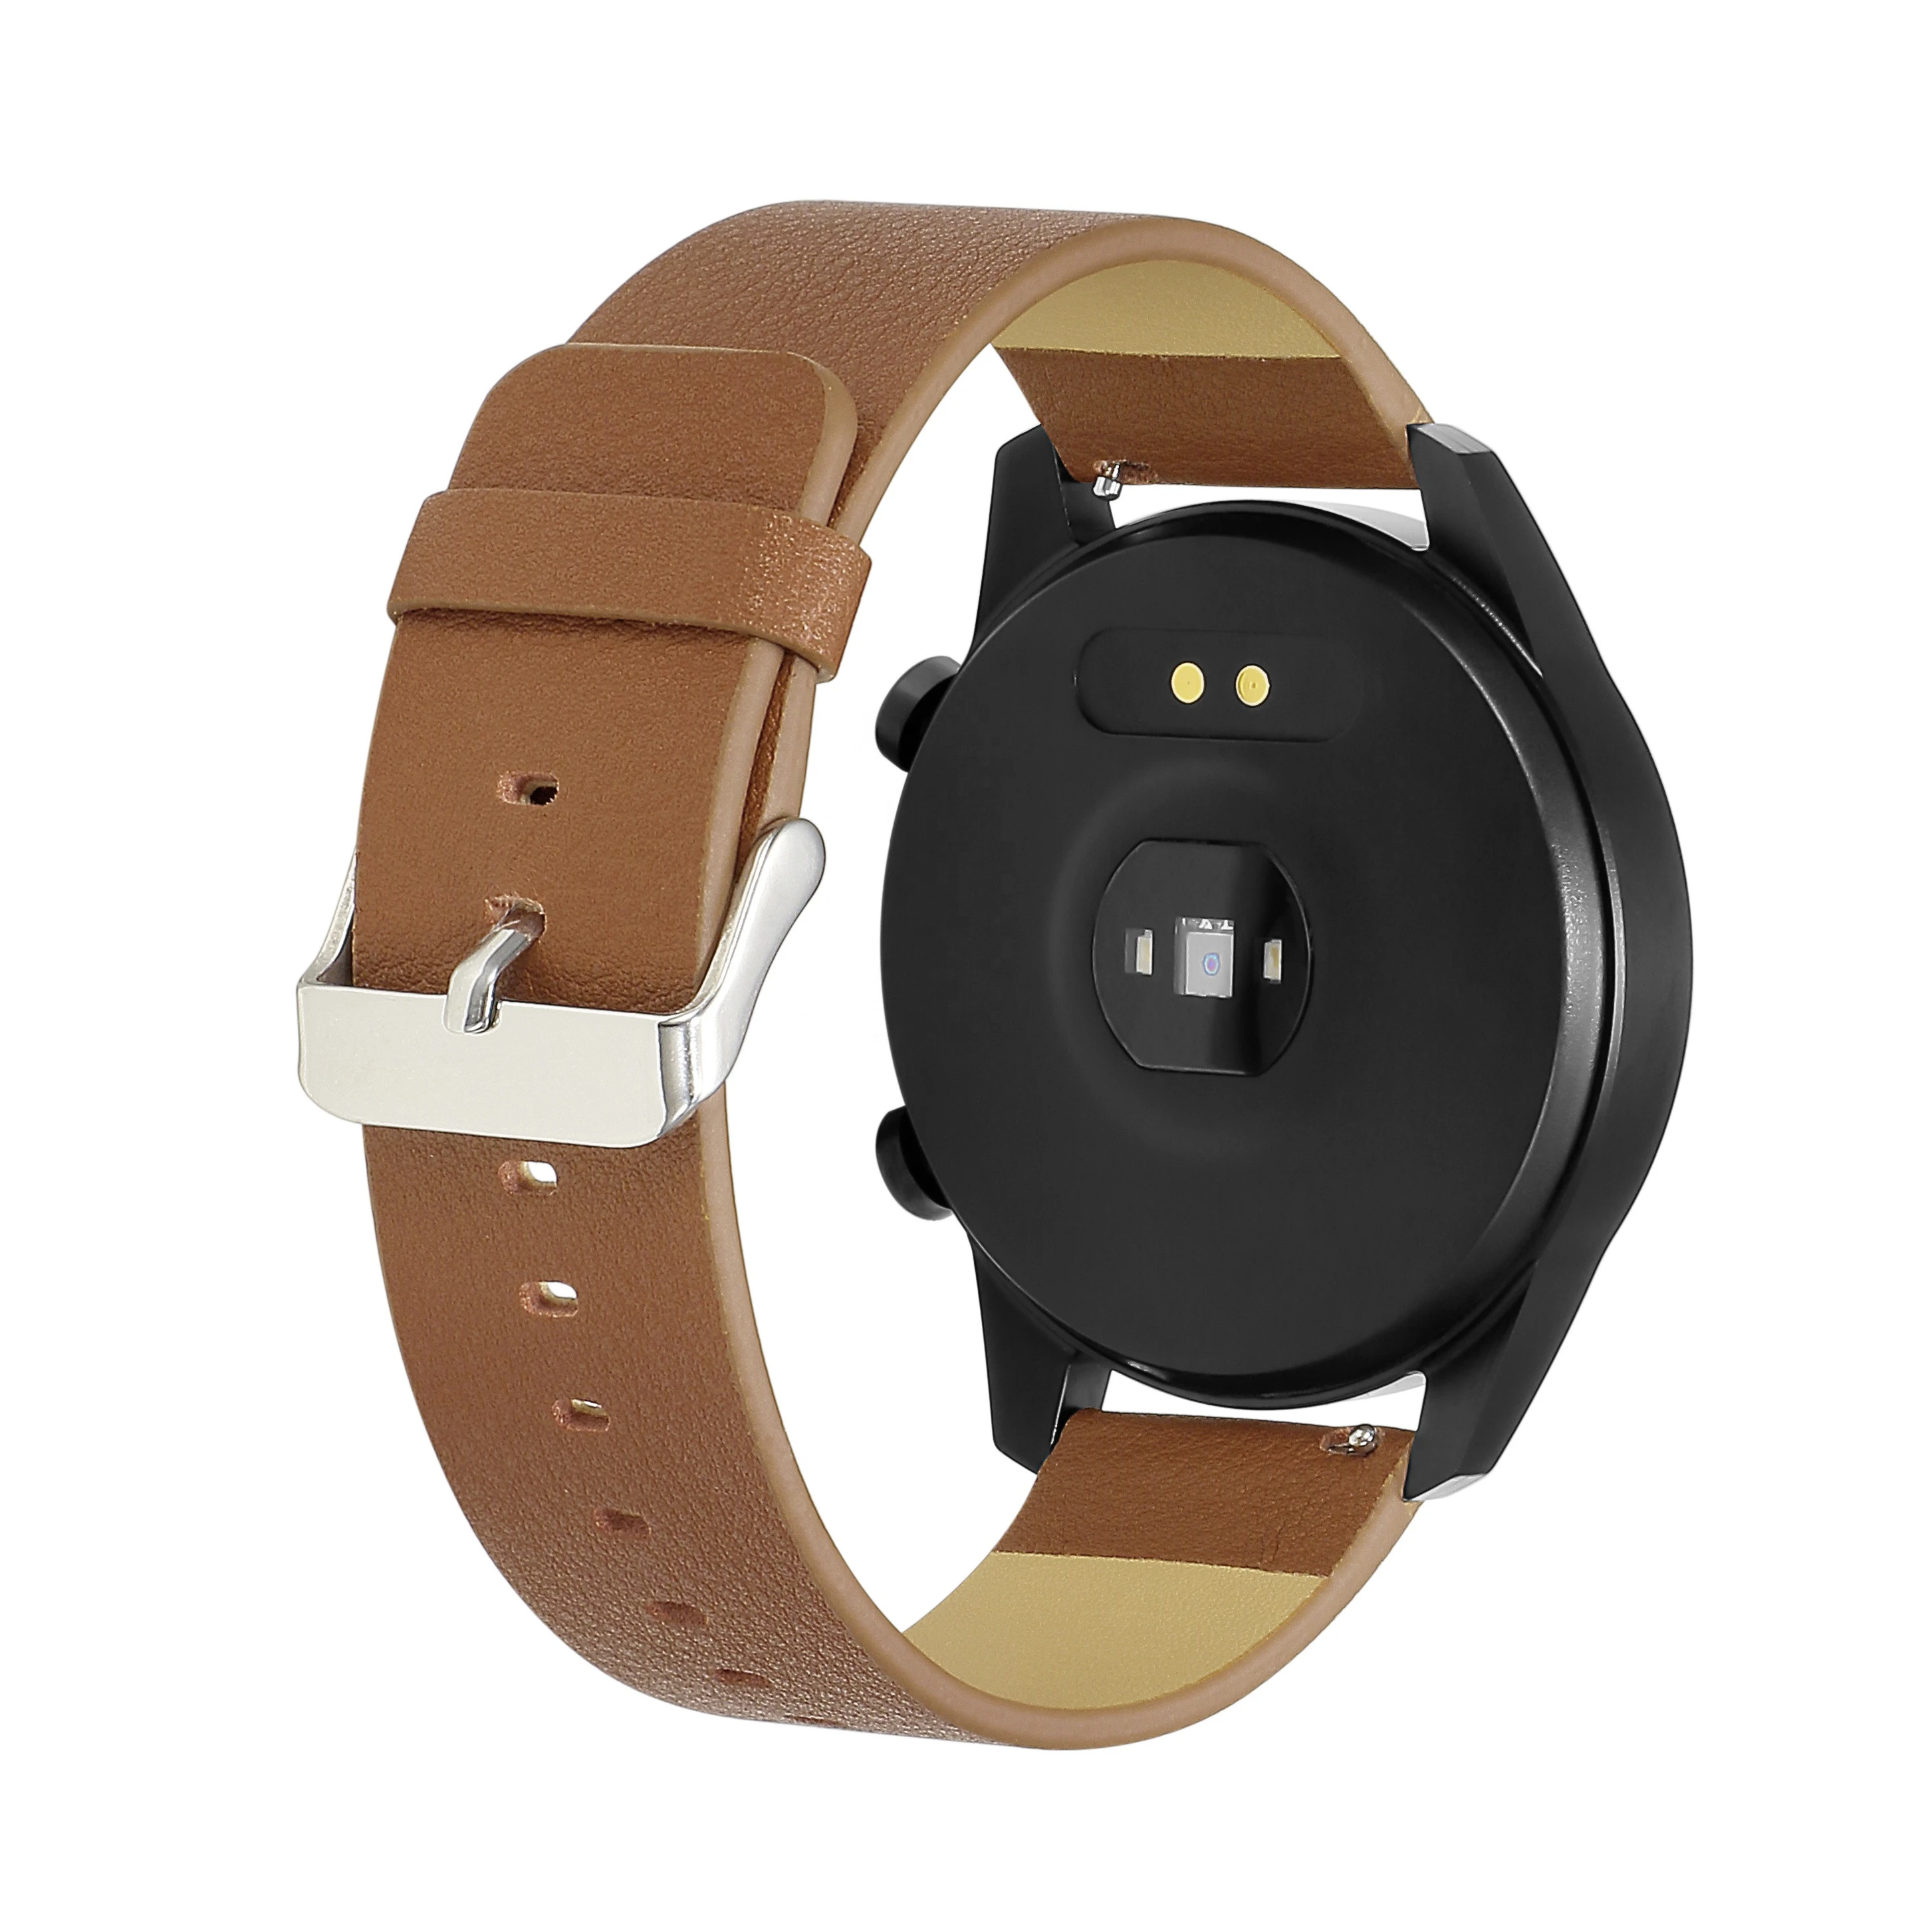 Wholesale Smart Watch Smart Bracelet Blue Tooth Bracelet Electronic Products ANDROID iOS